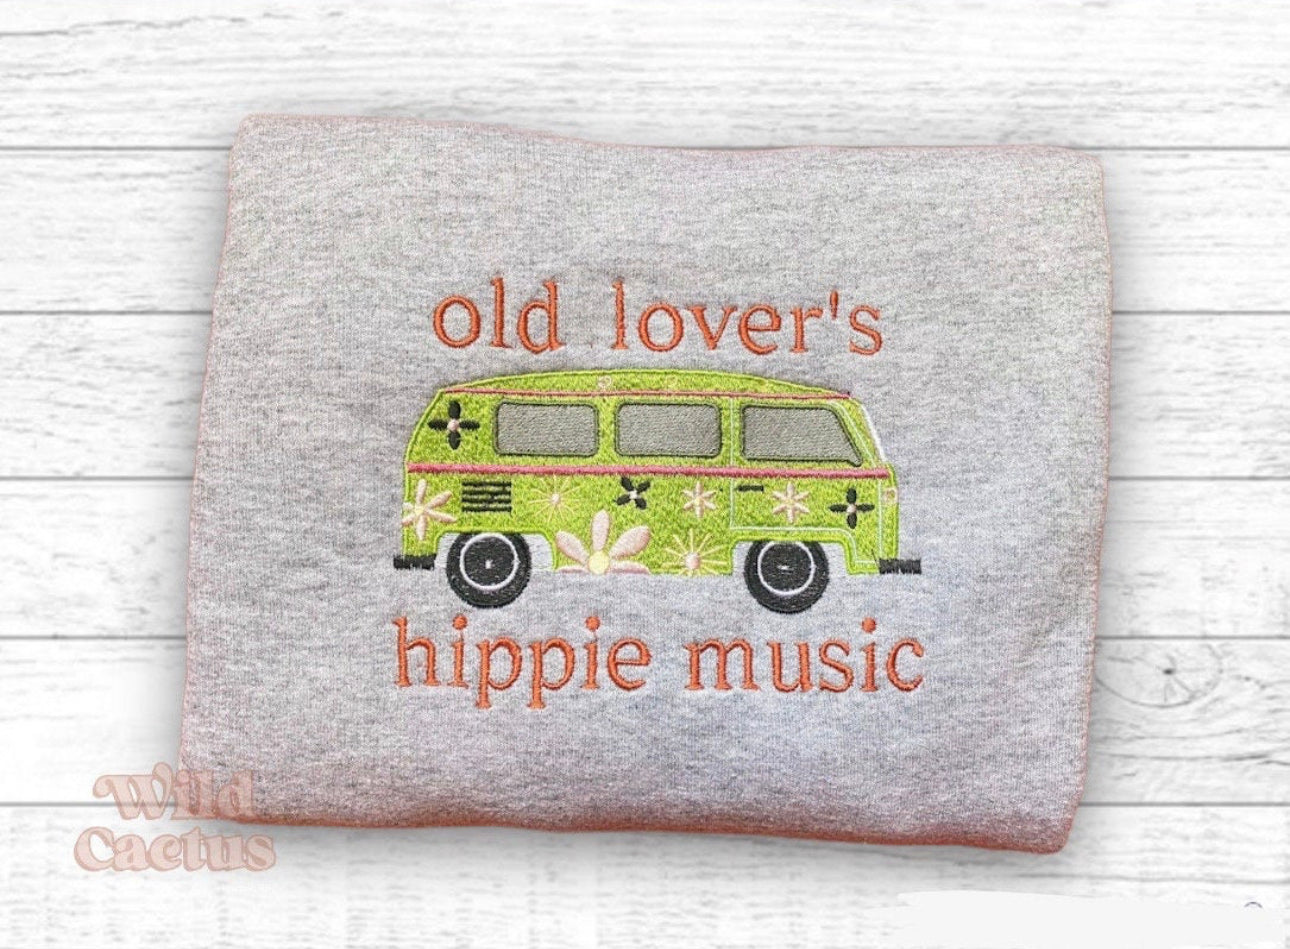 Old lovers hippie music - Harry styles inspired crewneck